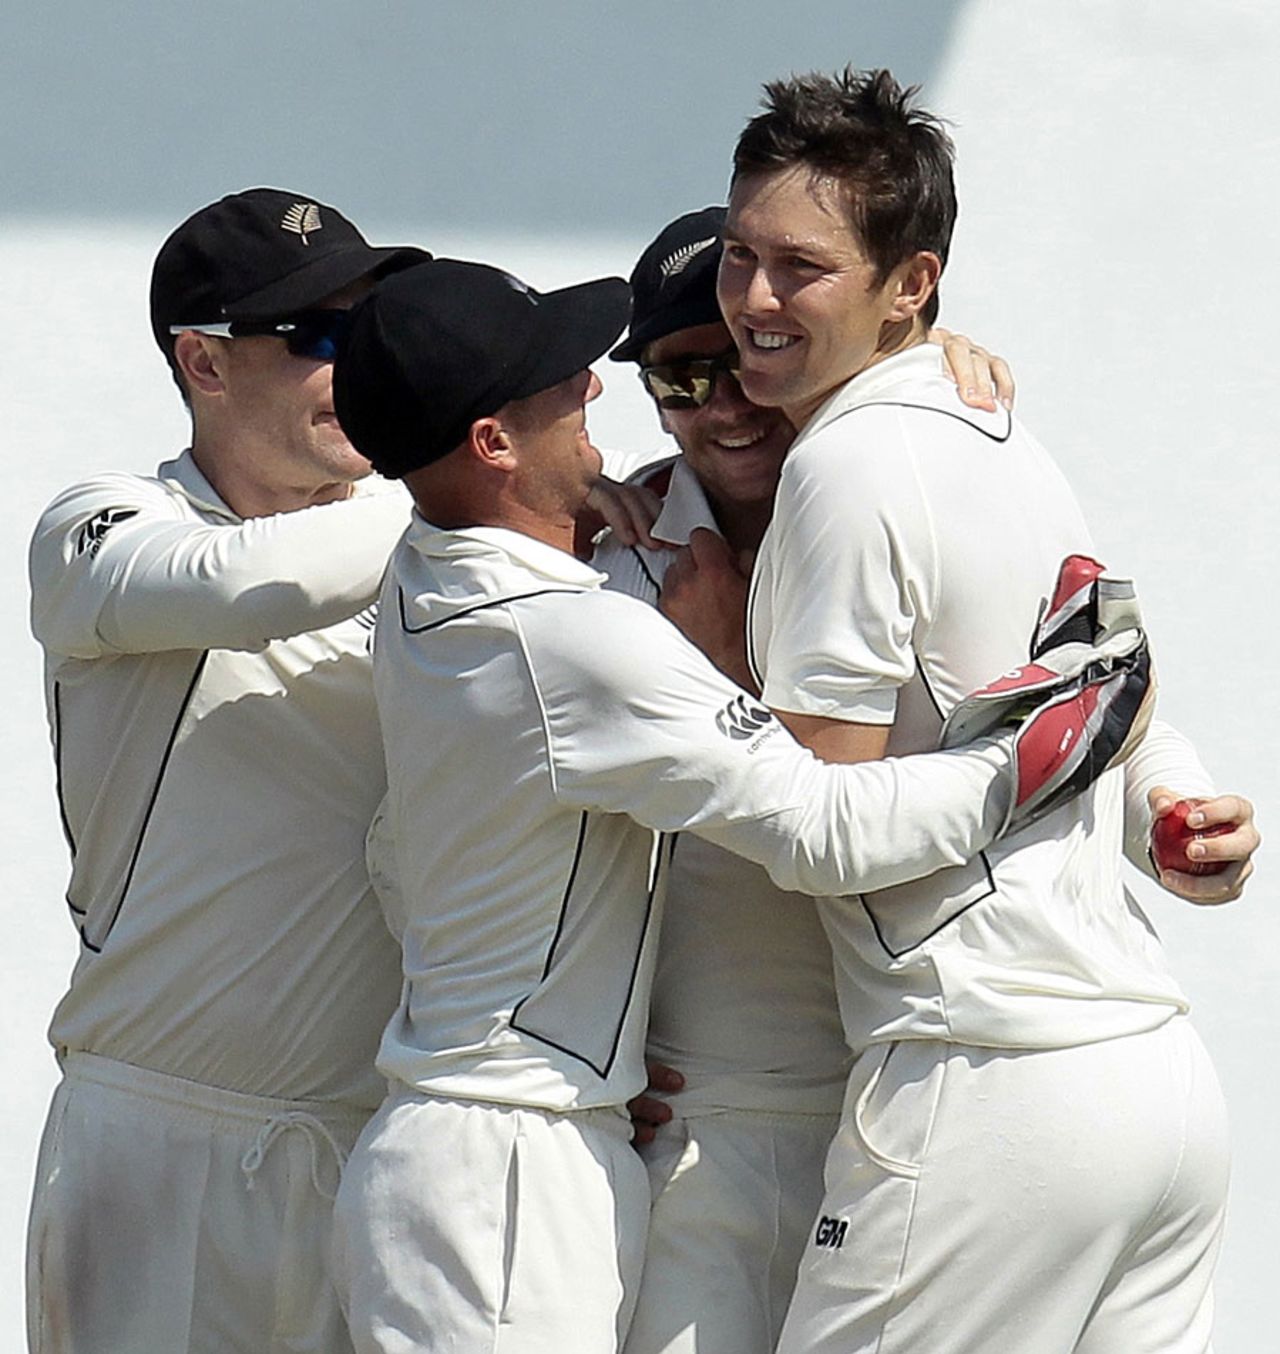 Trent Boult is congratulated by his team-mates, Sri Lanka v New Zealand, 2nd Test, Colombo, 4th day, November 28, 2012